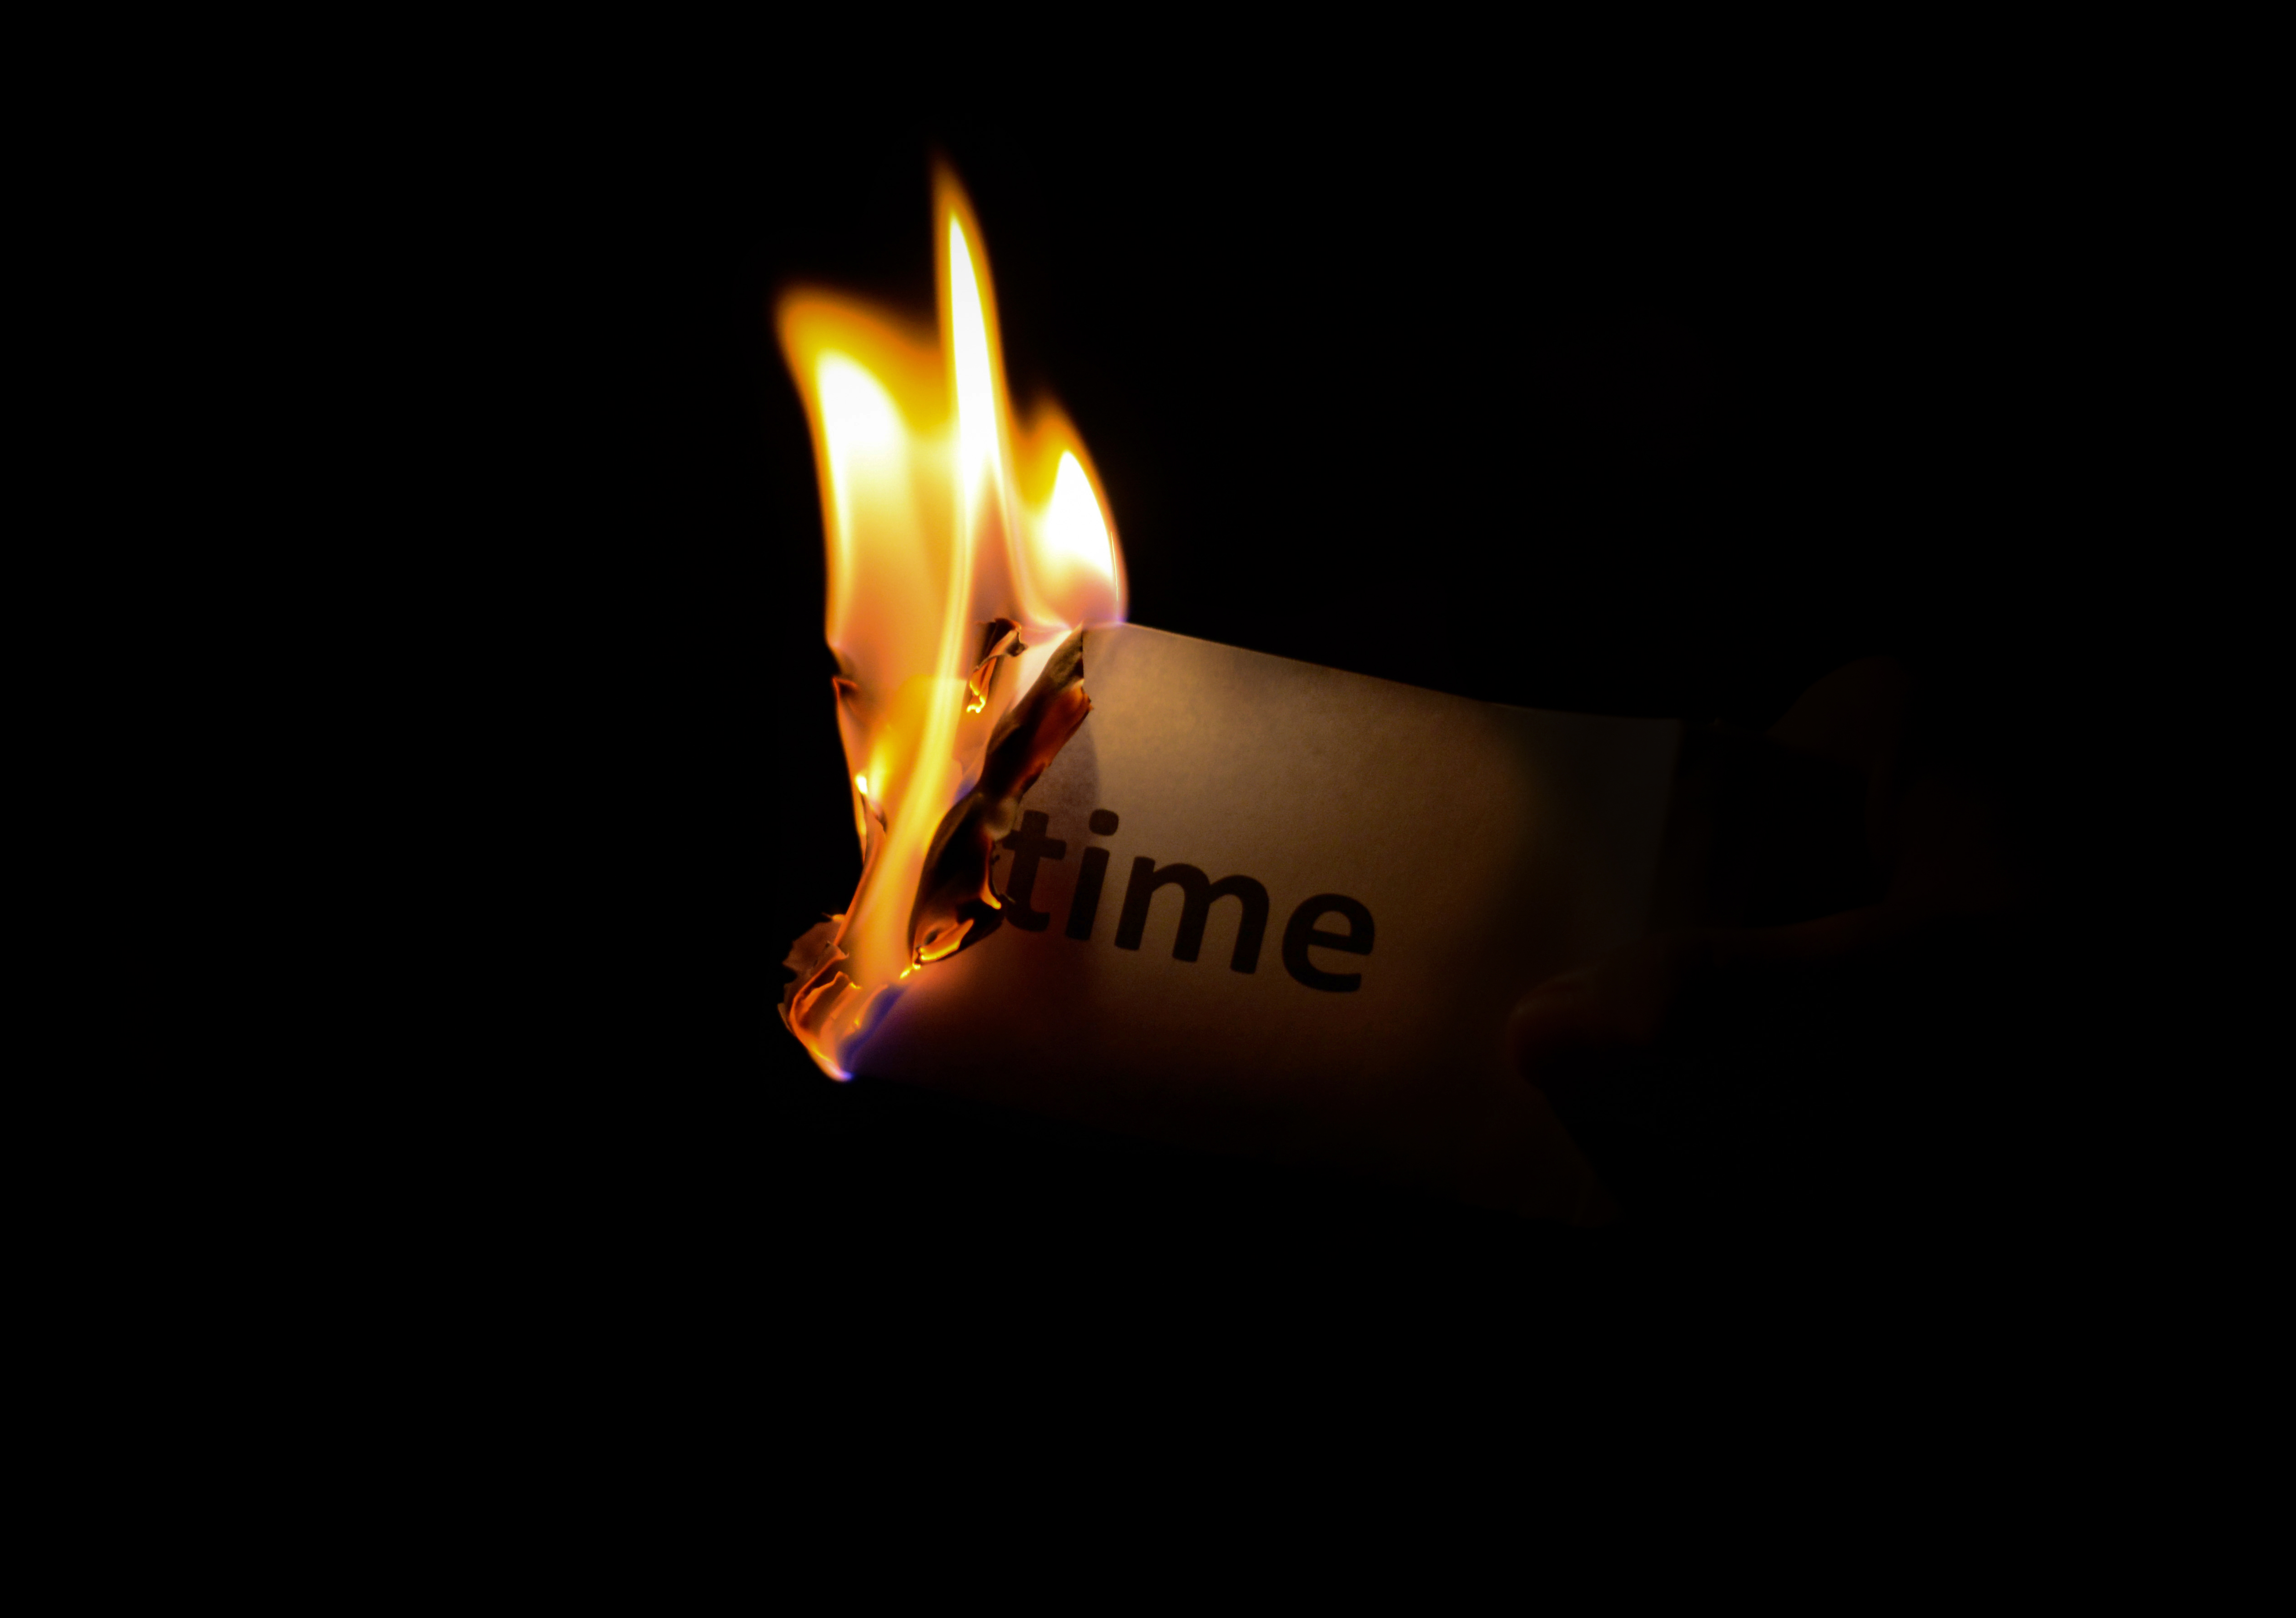 android words, inspiration, it's time, time, fire